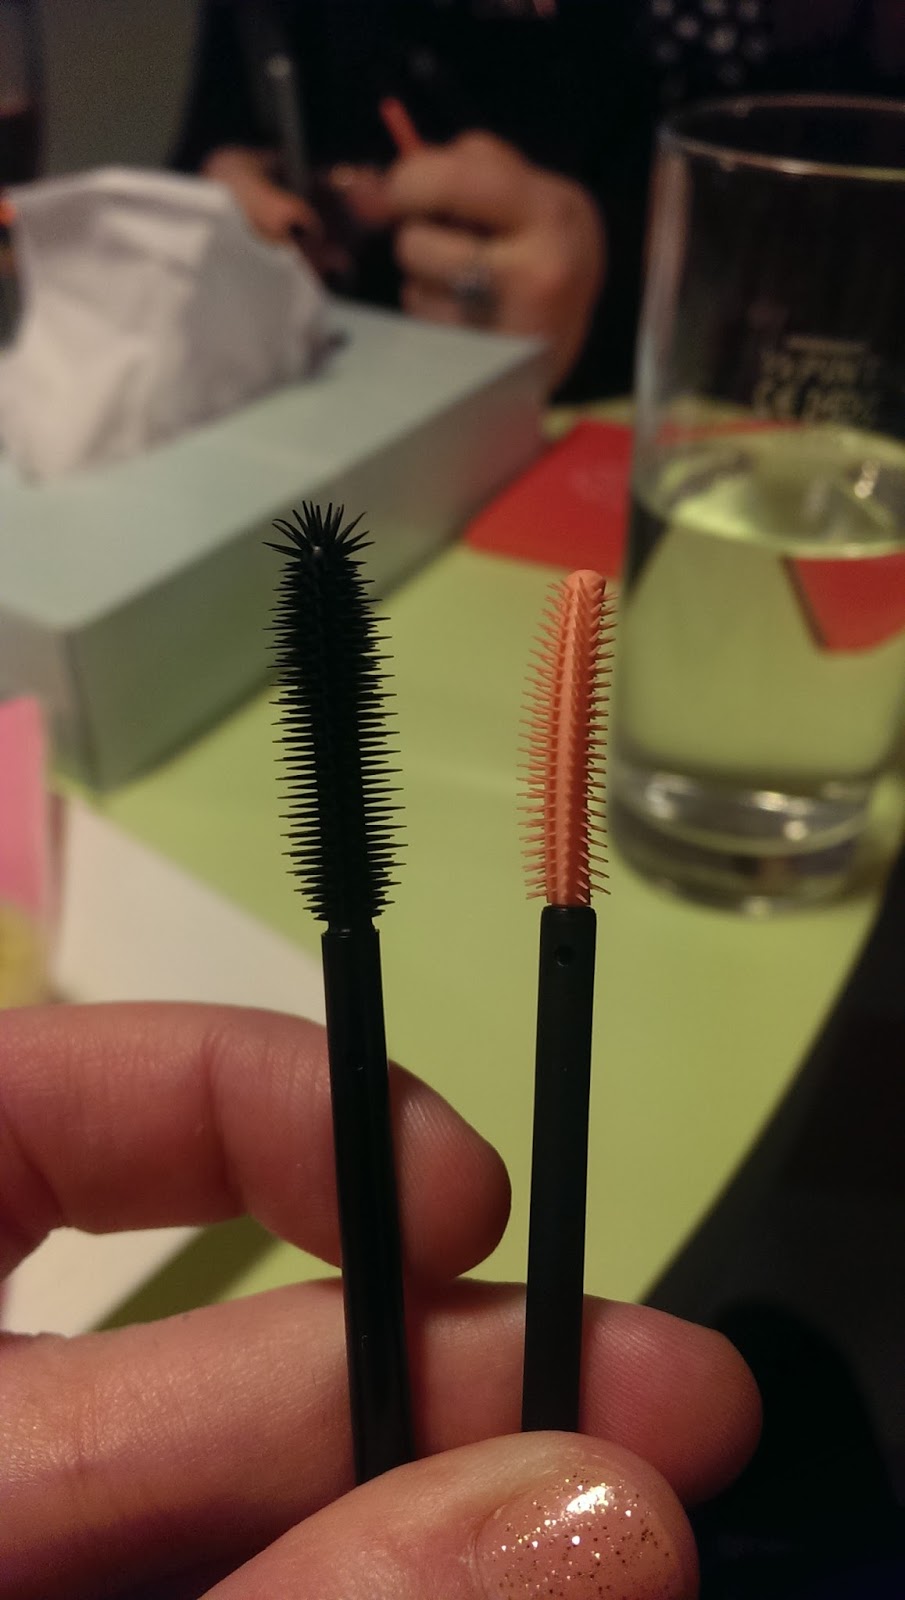 Benefit They're Real Brush Compared To Roller Lash Brush